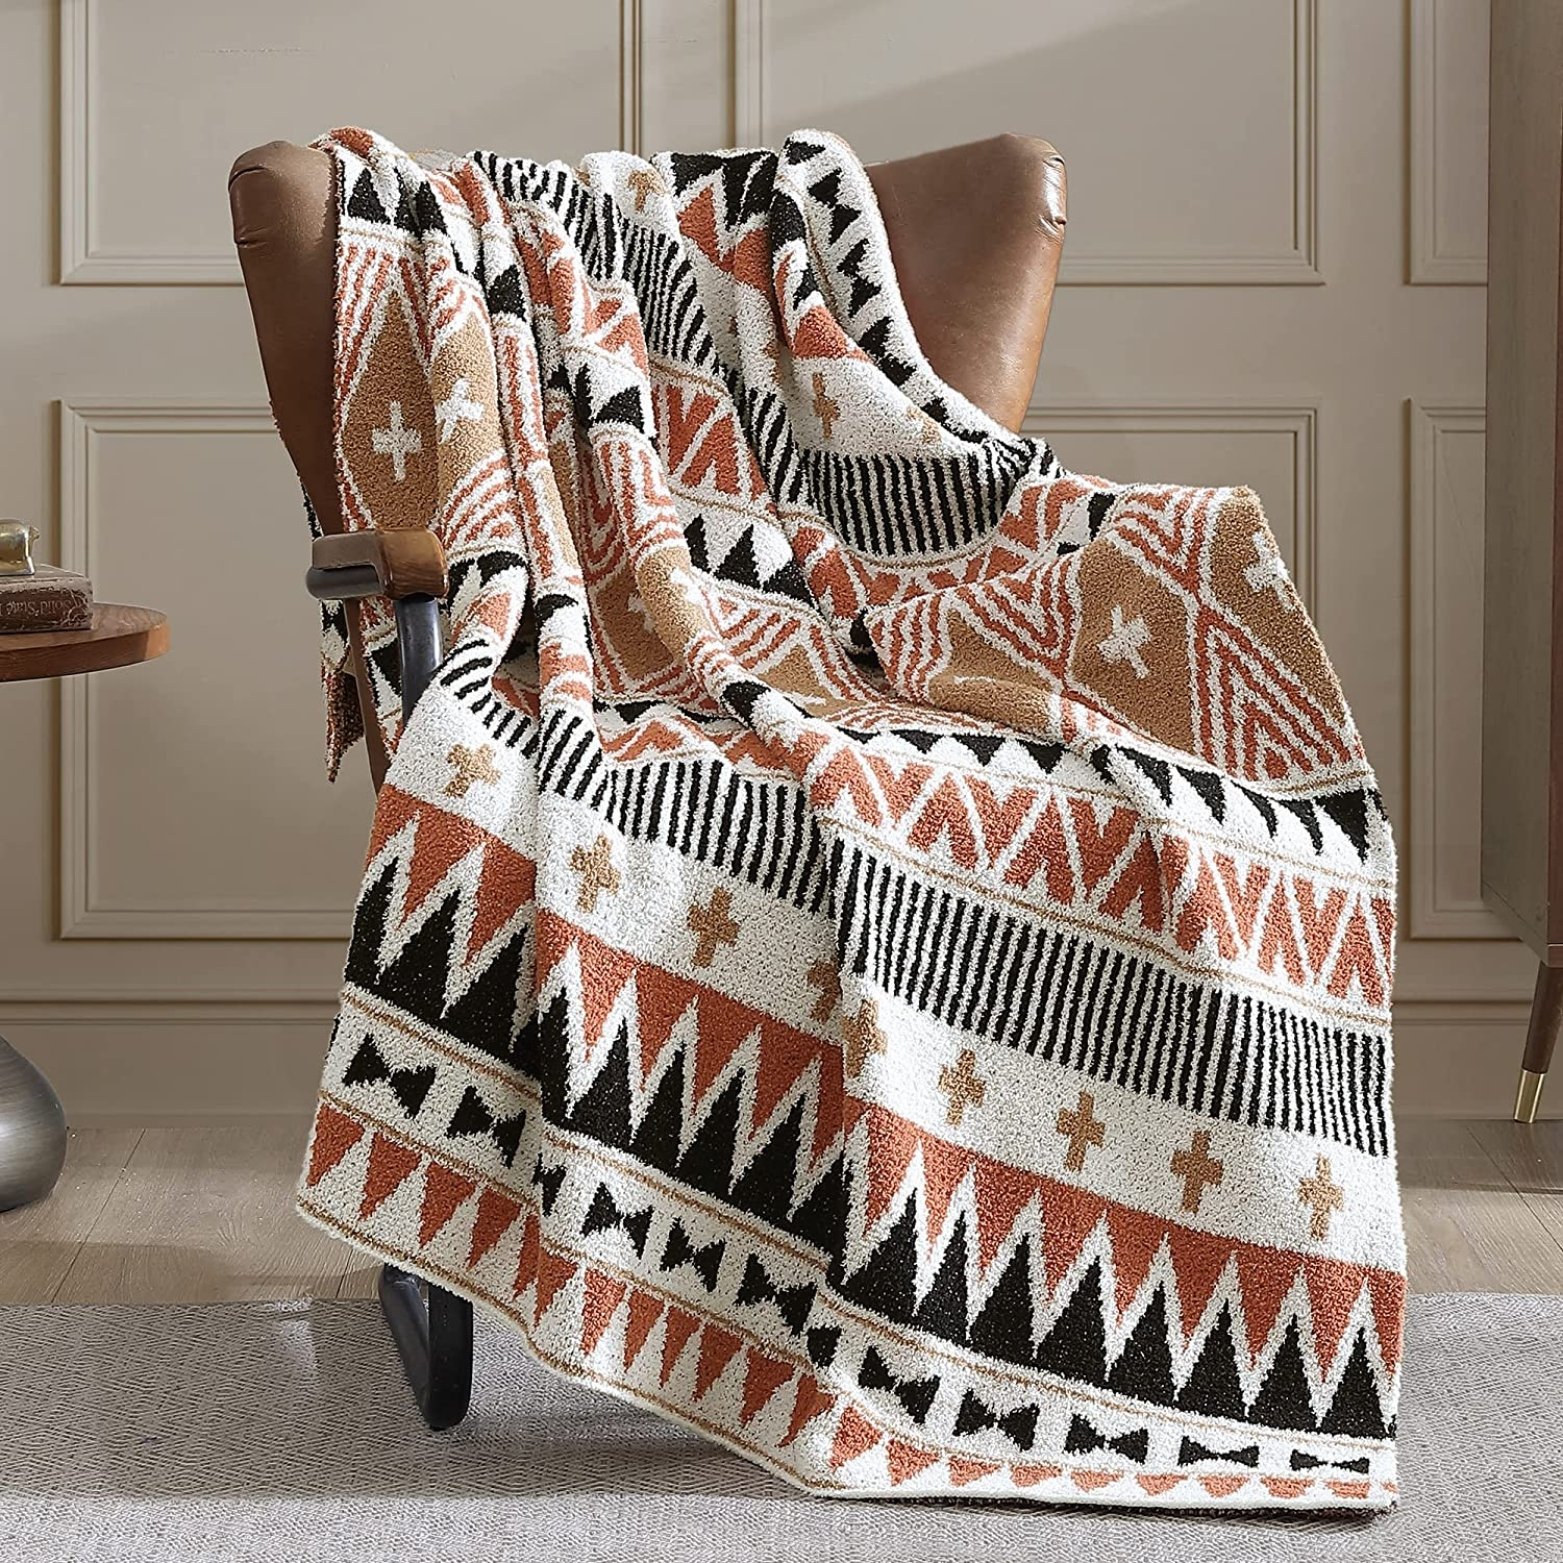 Sherpa Textured Throw with Diagonals, Crosses, Line Designs.jpg